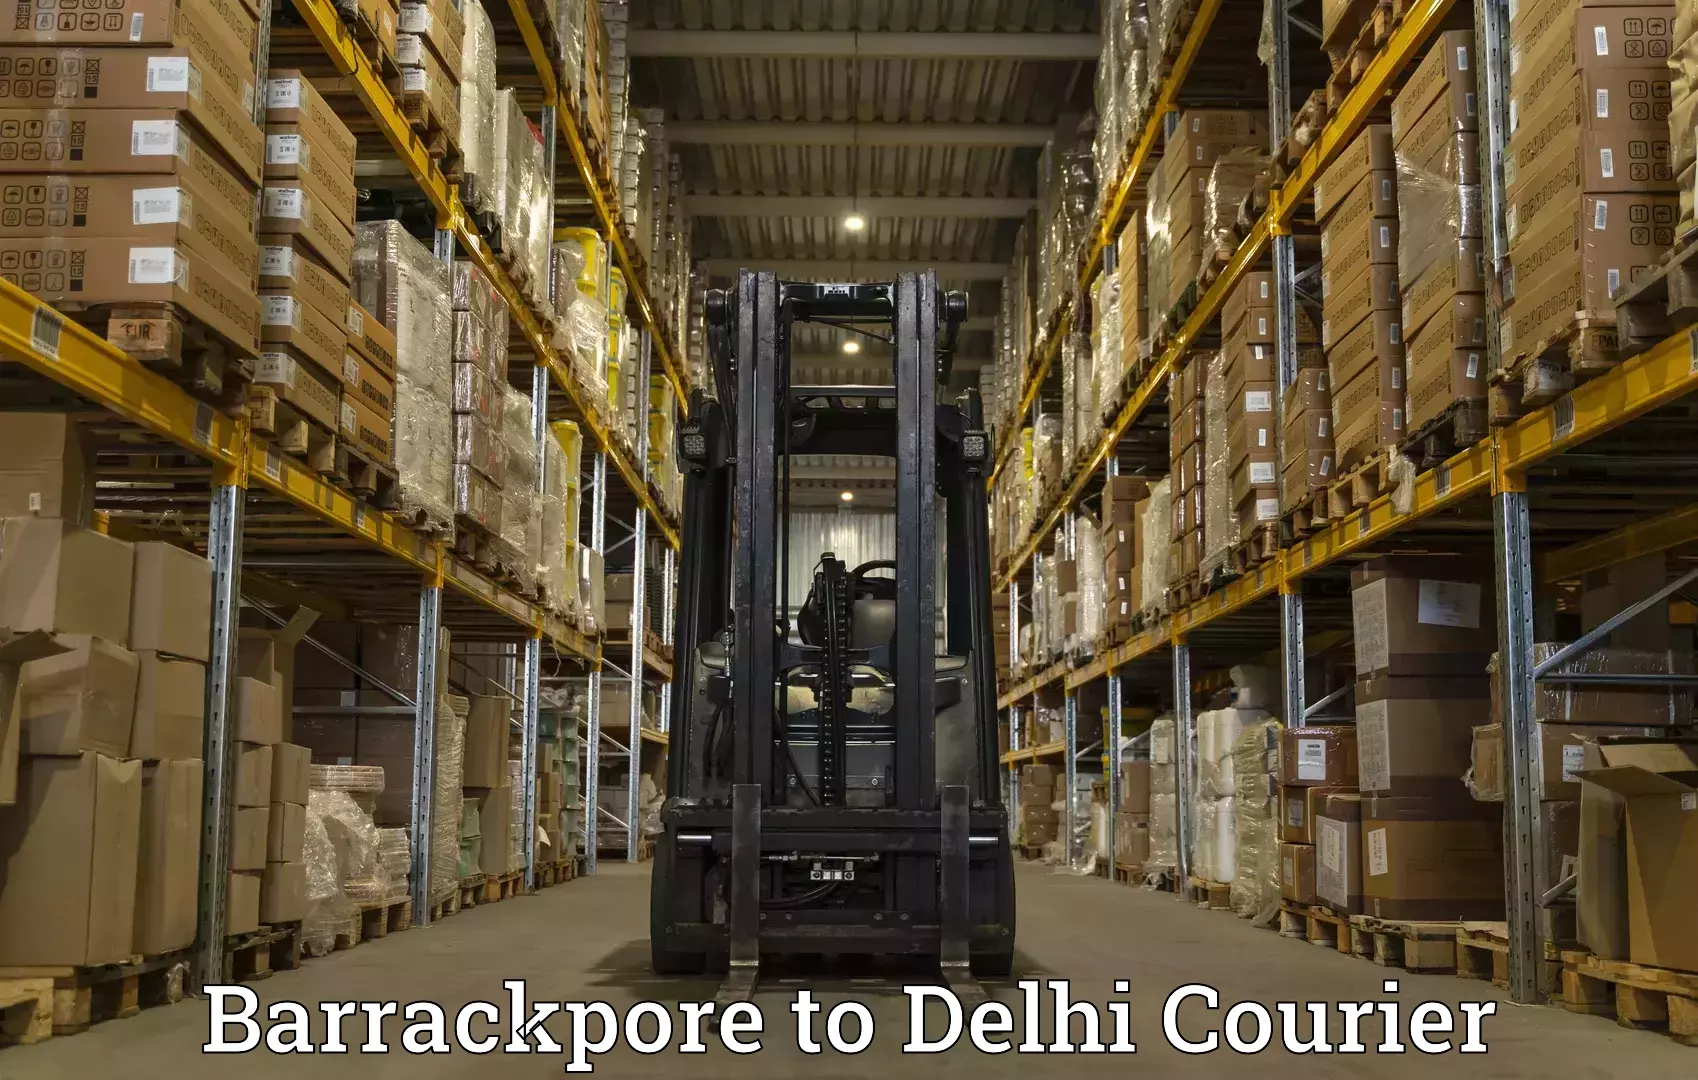 Courier service booking Barrackpore to NCR